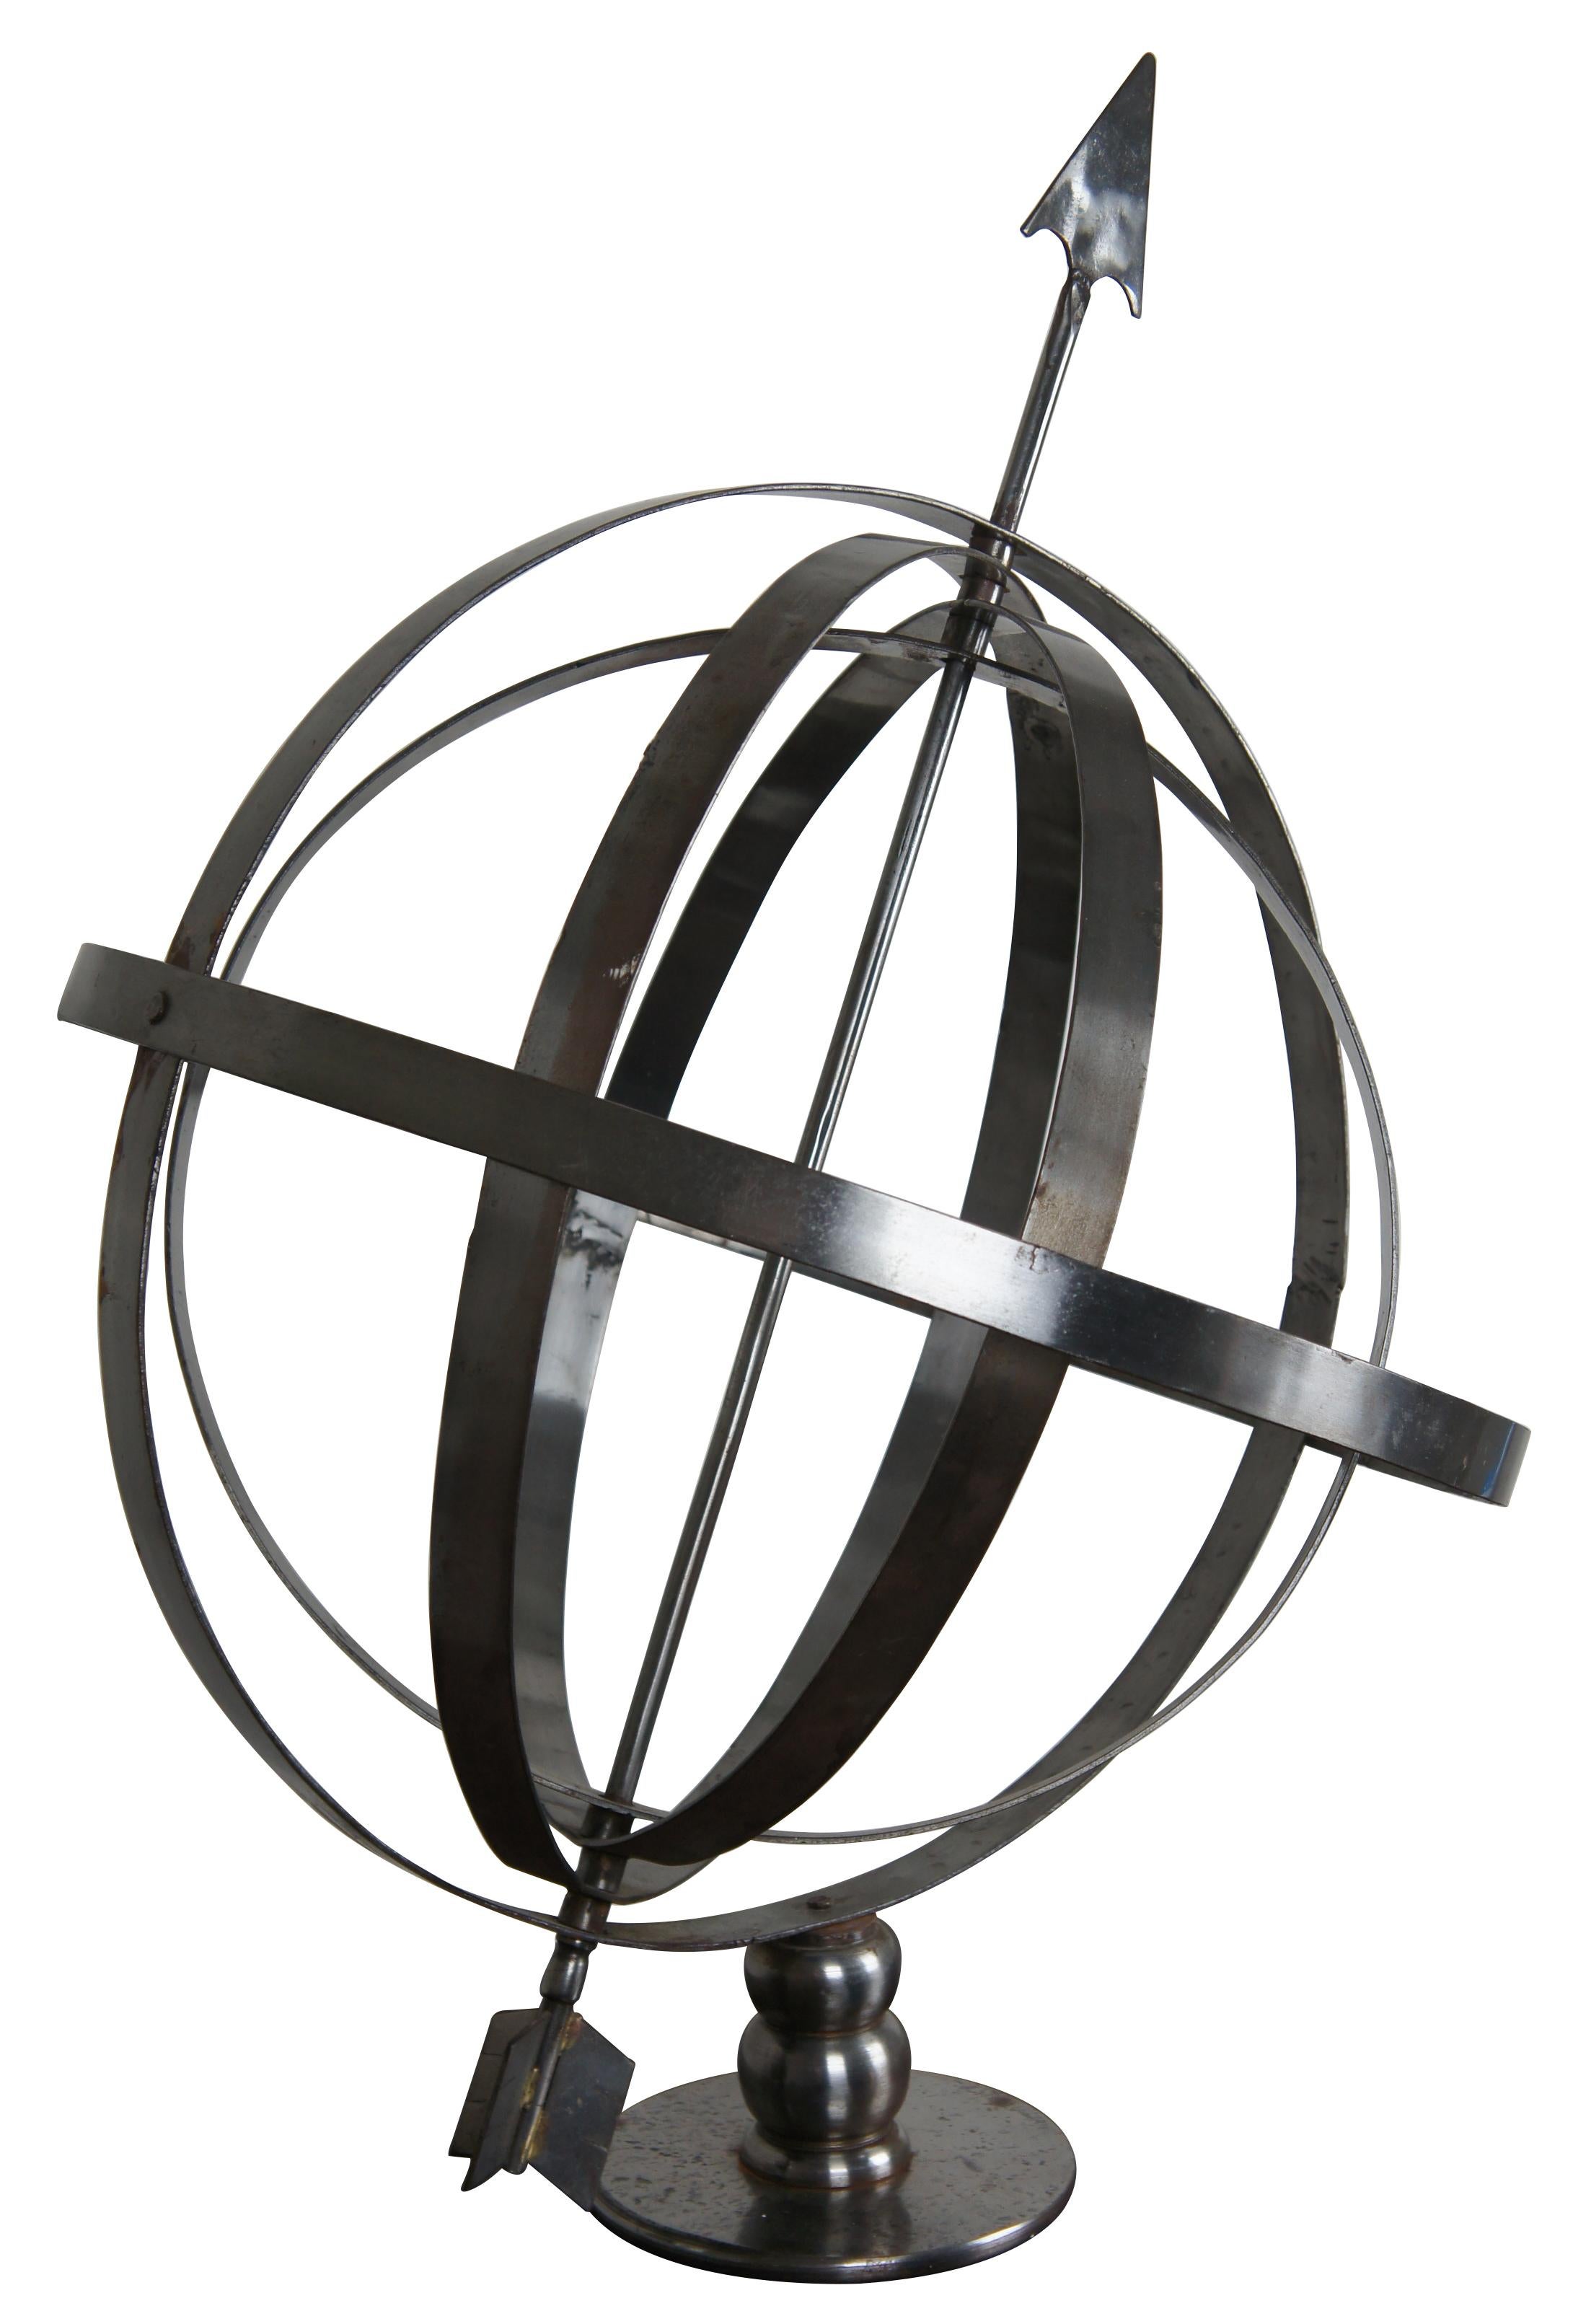 Vintage silver tone metal armillary sphere made of five concentric bands with an arrow through the axis. Measure: 34